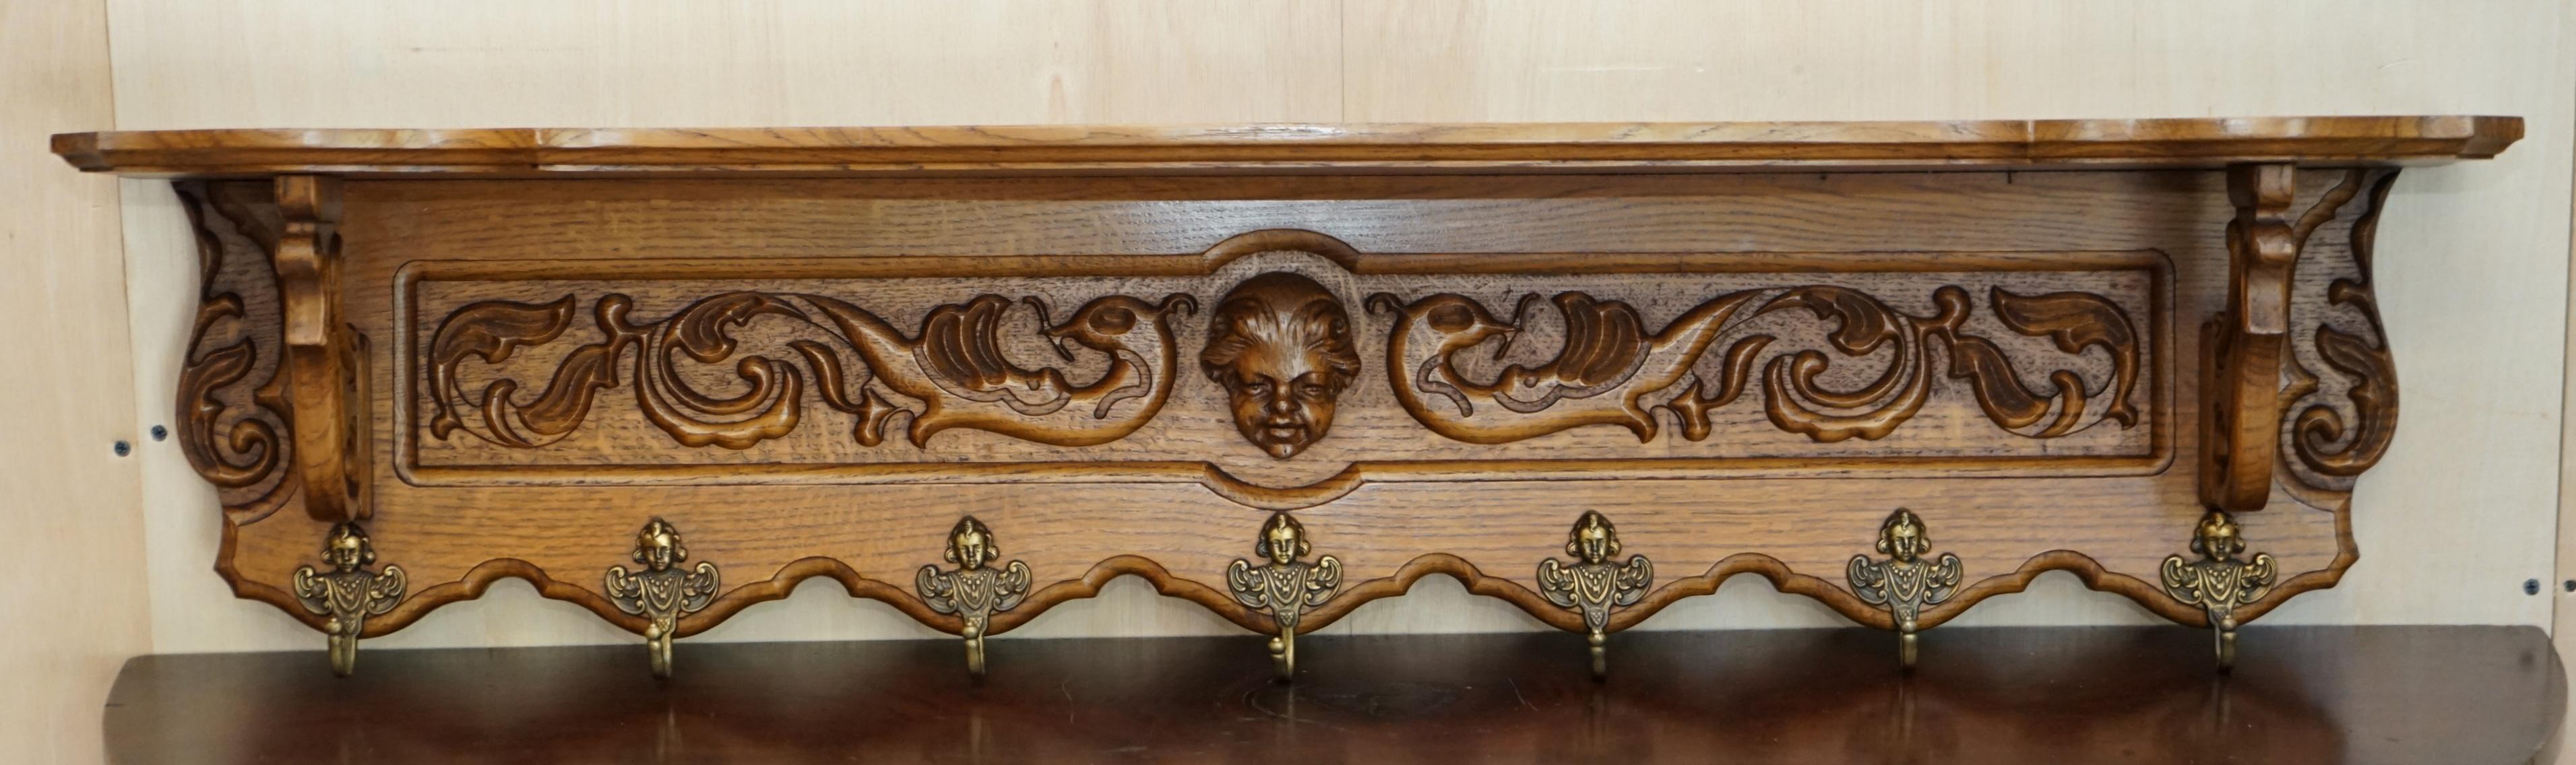 Royal House Antiques

Royal House Antiques is delighted to offer for sale this lovely, heavily carved Dutch oak wall hanging coat hat and scarf rack with French Royalty head gold gilt brass hooks and large Cherub head carved to the central middle